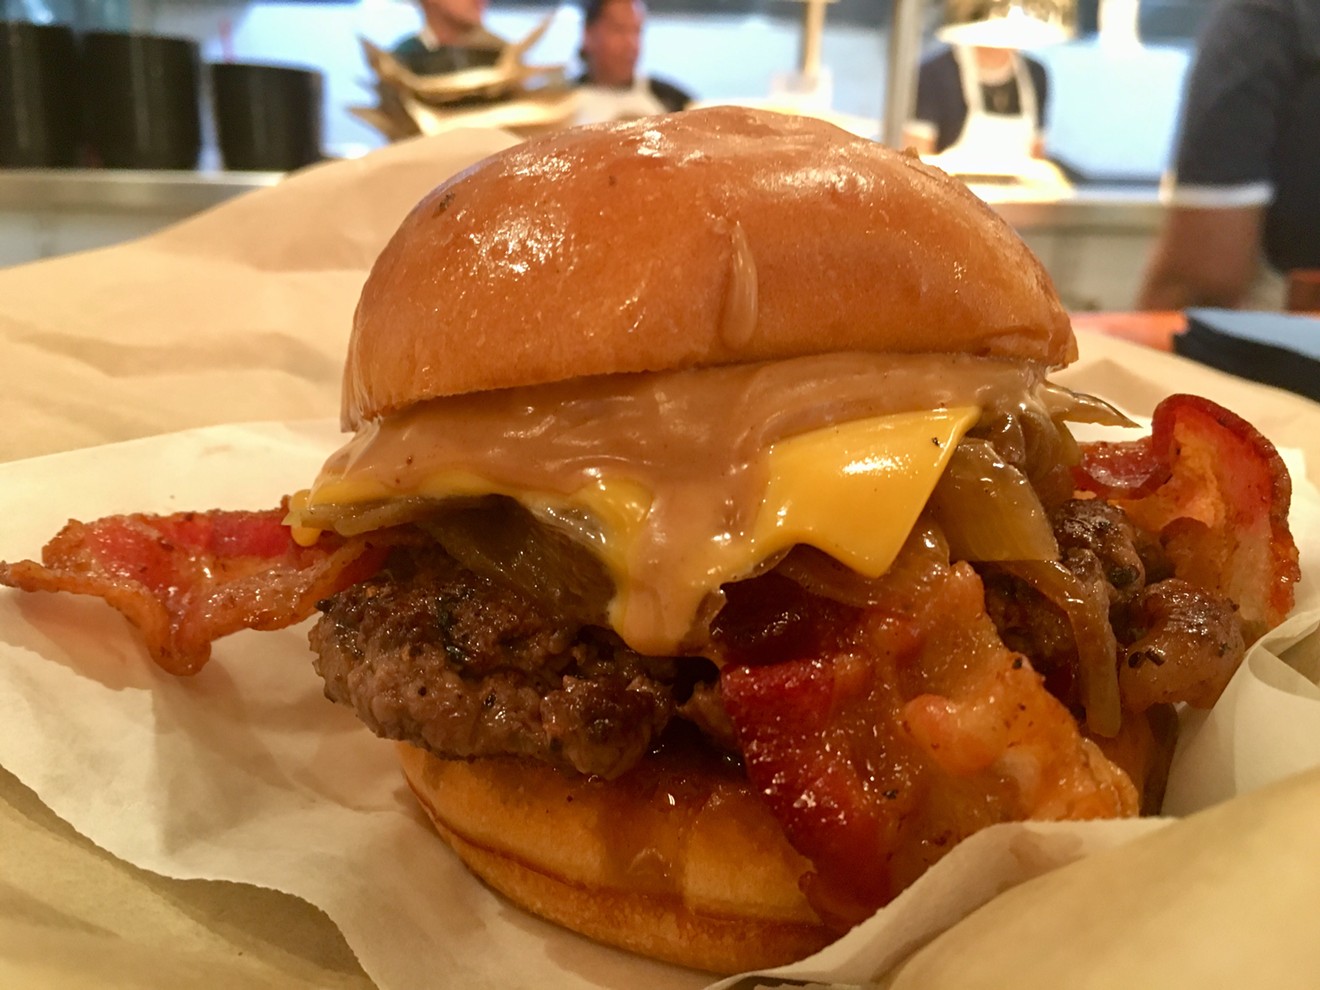 The peanut butter and bacon burger: A quarter-pound of Nebraska chuck beef topped with Jif, the creamy stuff, with hot pepper jam on a soft brioche bun for $6.59.